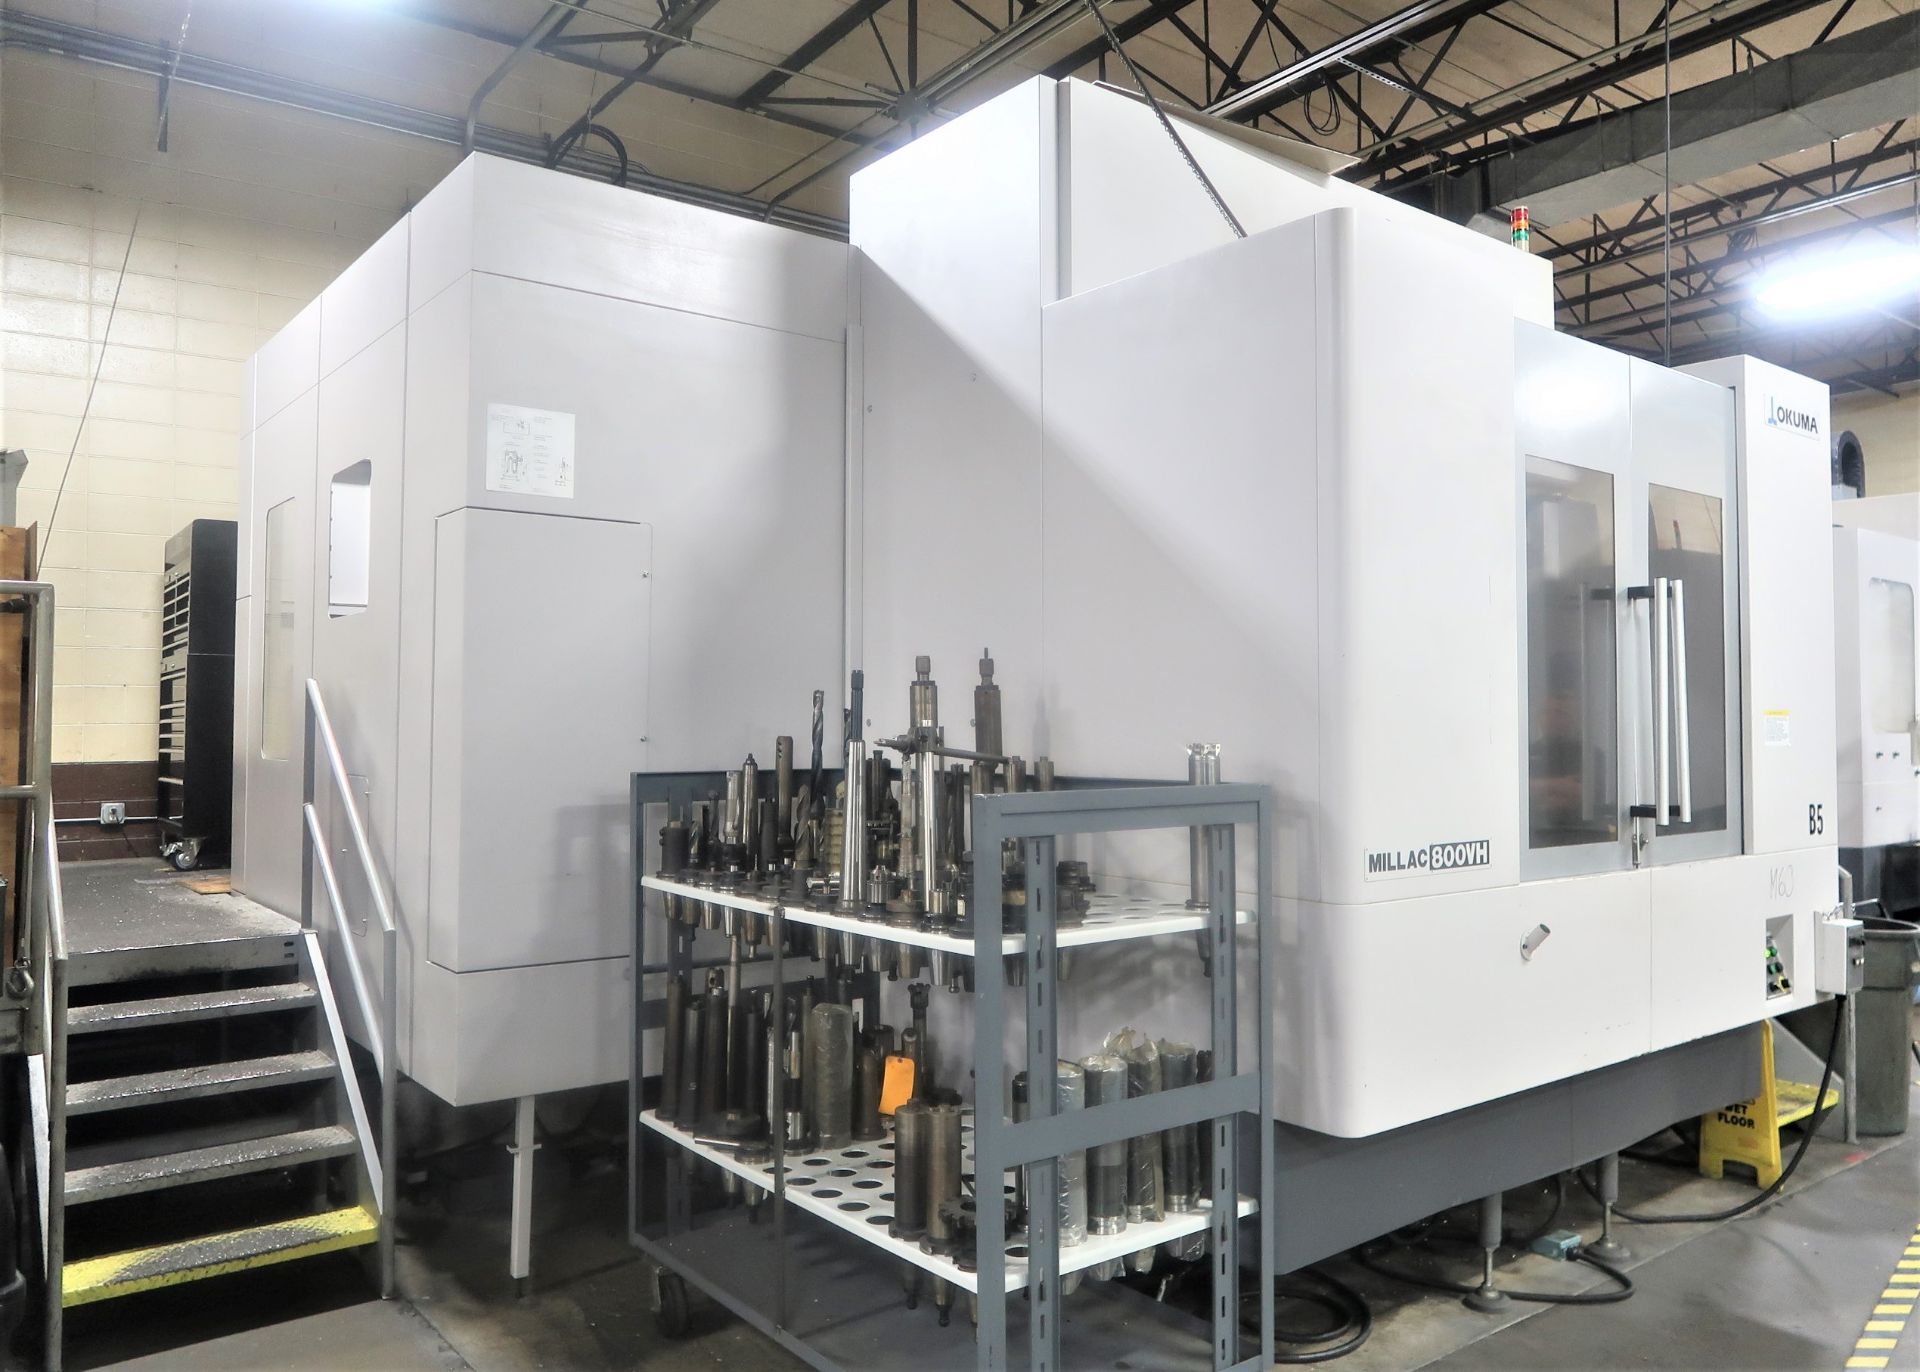 OKUMA MILLAC 800VH 5-AXIS CNC MACHINING CENTER WITH 31.5" PALLETS, NEW 2008 2996 HOURS AEROSPACE PLT